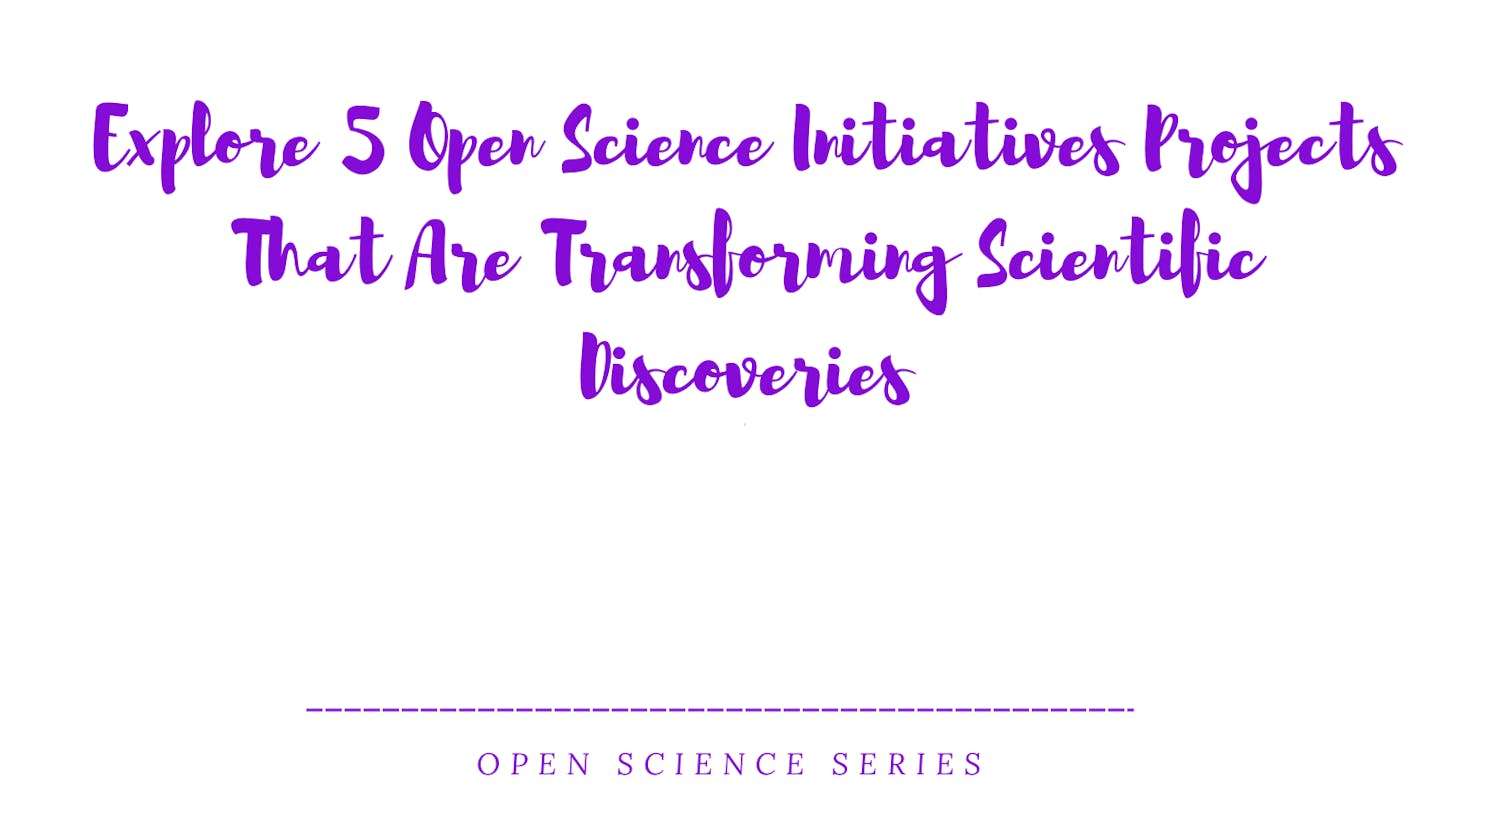 Explore 5 Open Science Initiative Projects That Are Transforming Scientific Discoveries